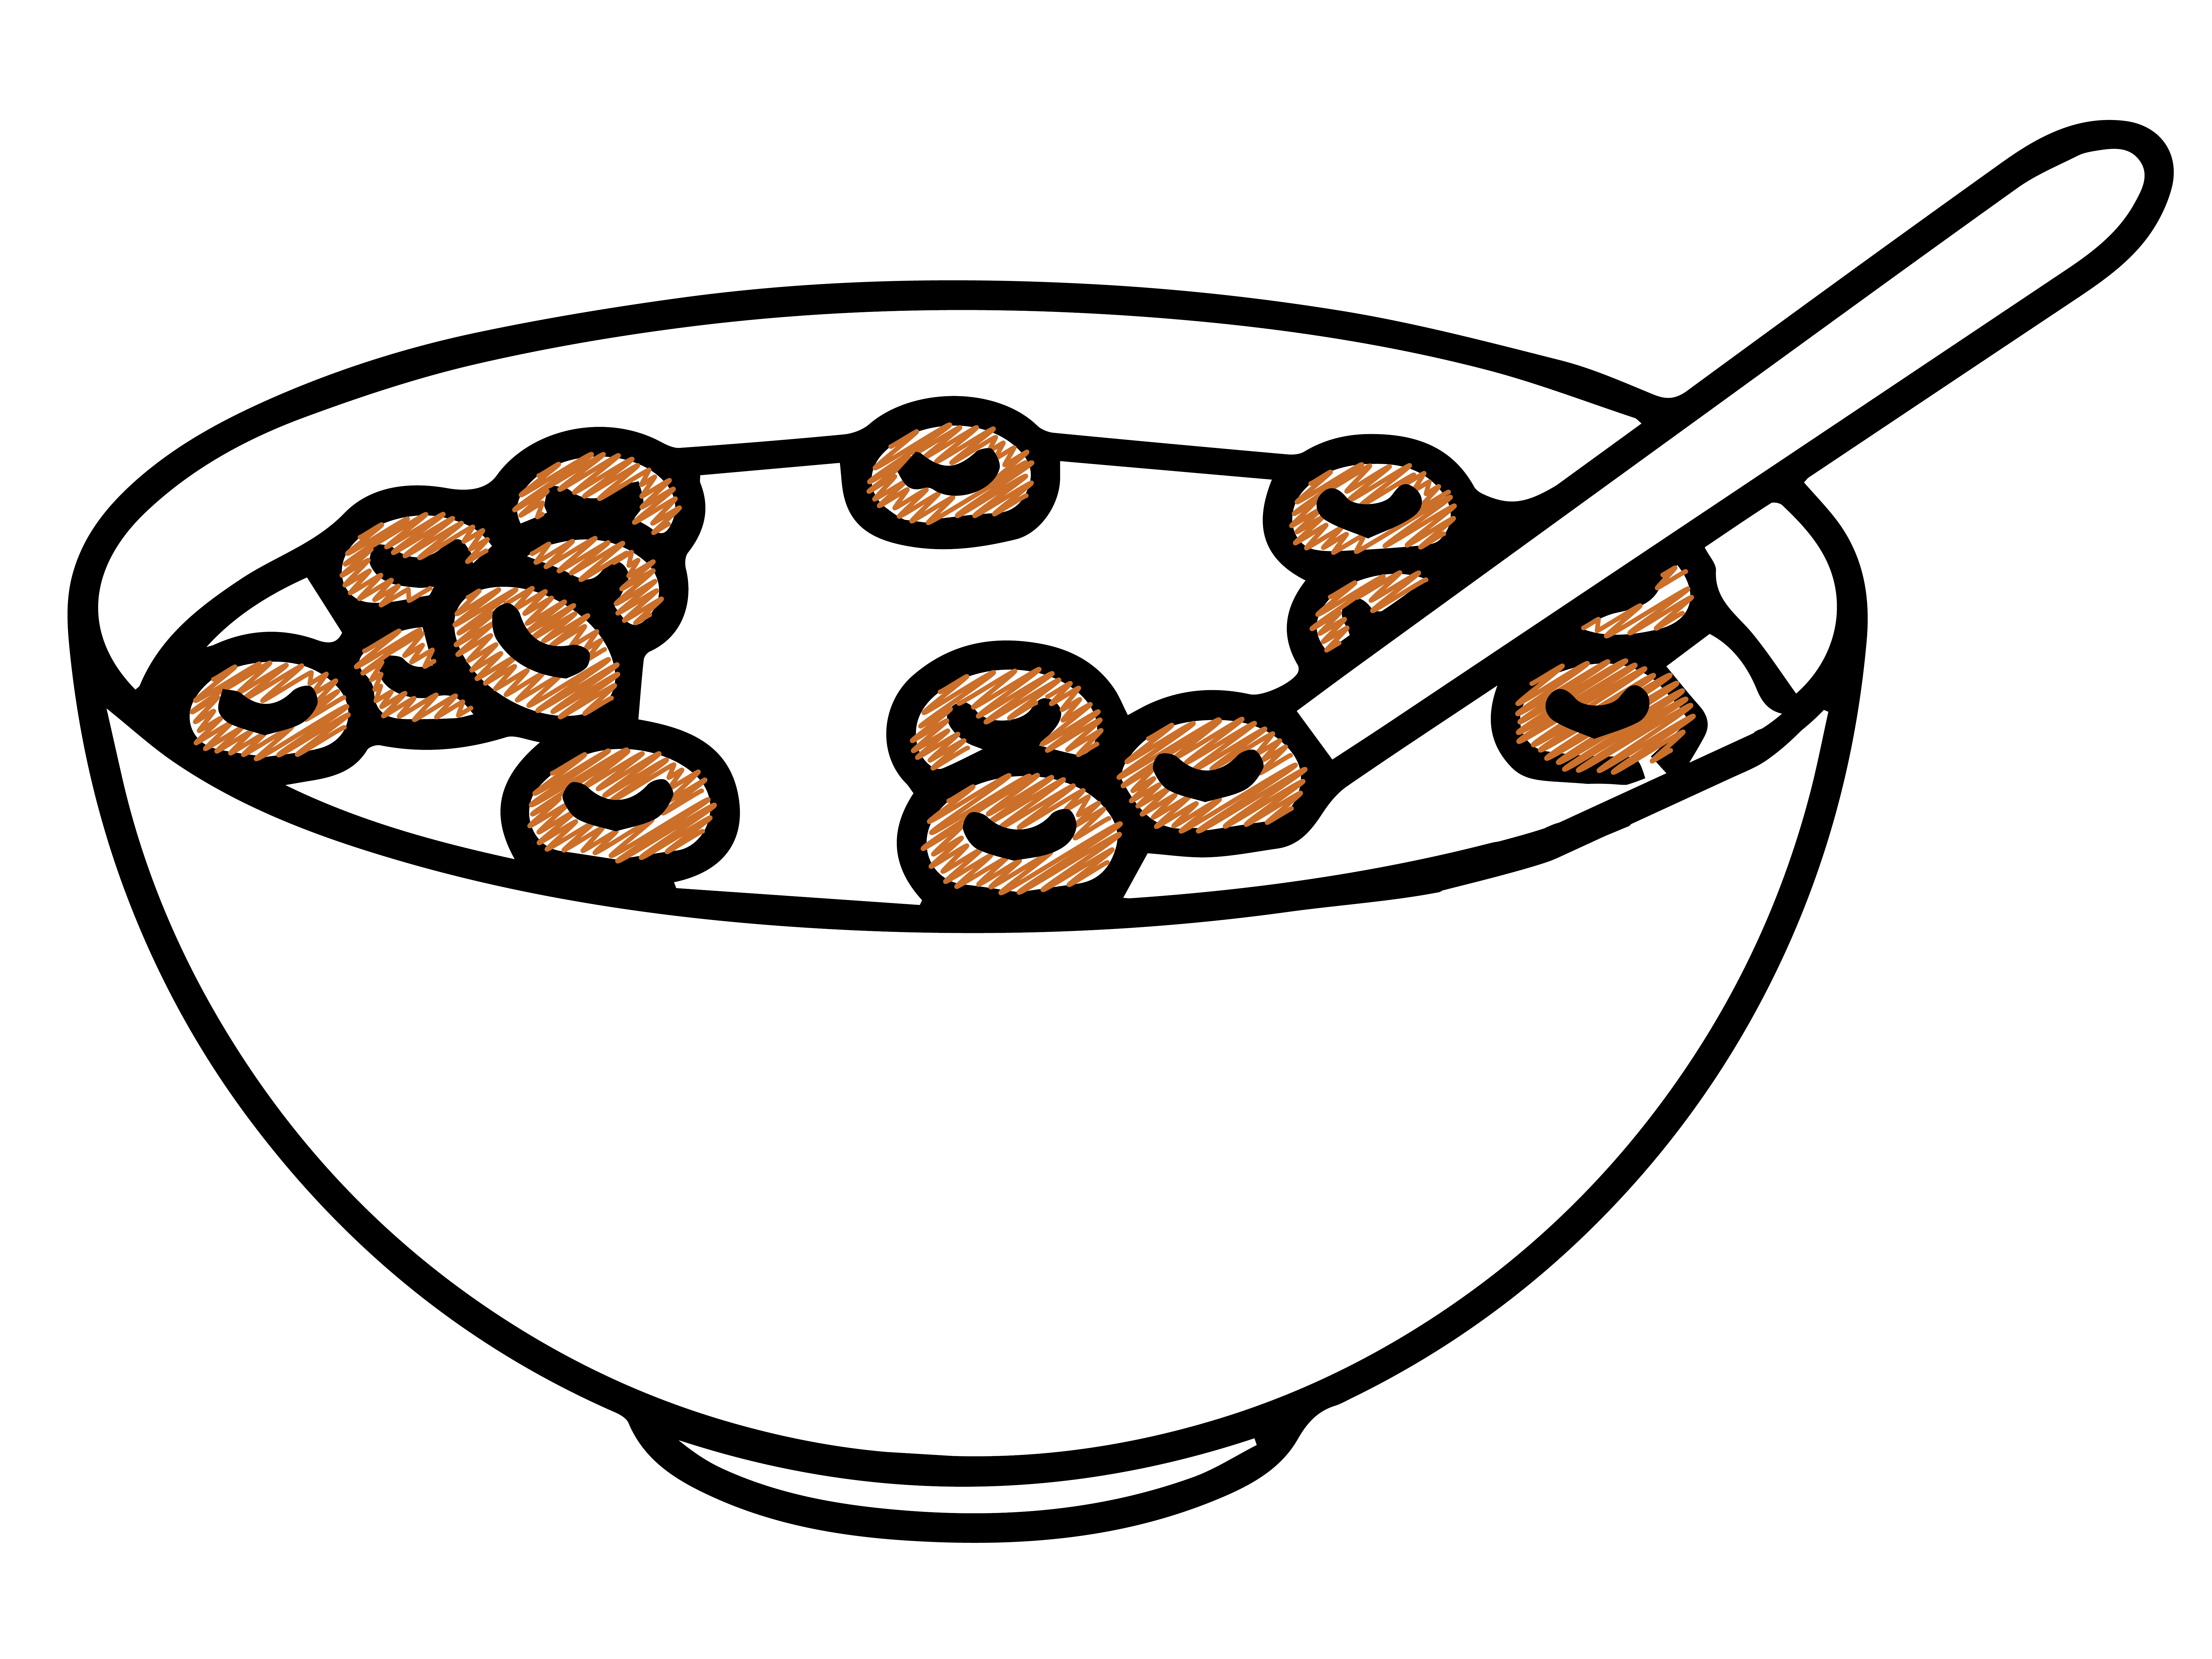 a bowl of breakfast cereal the perfect fuel before an active day out at Easter